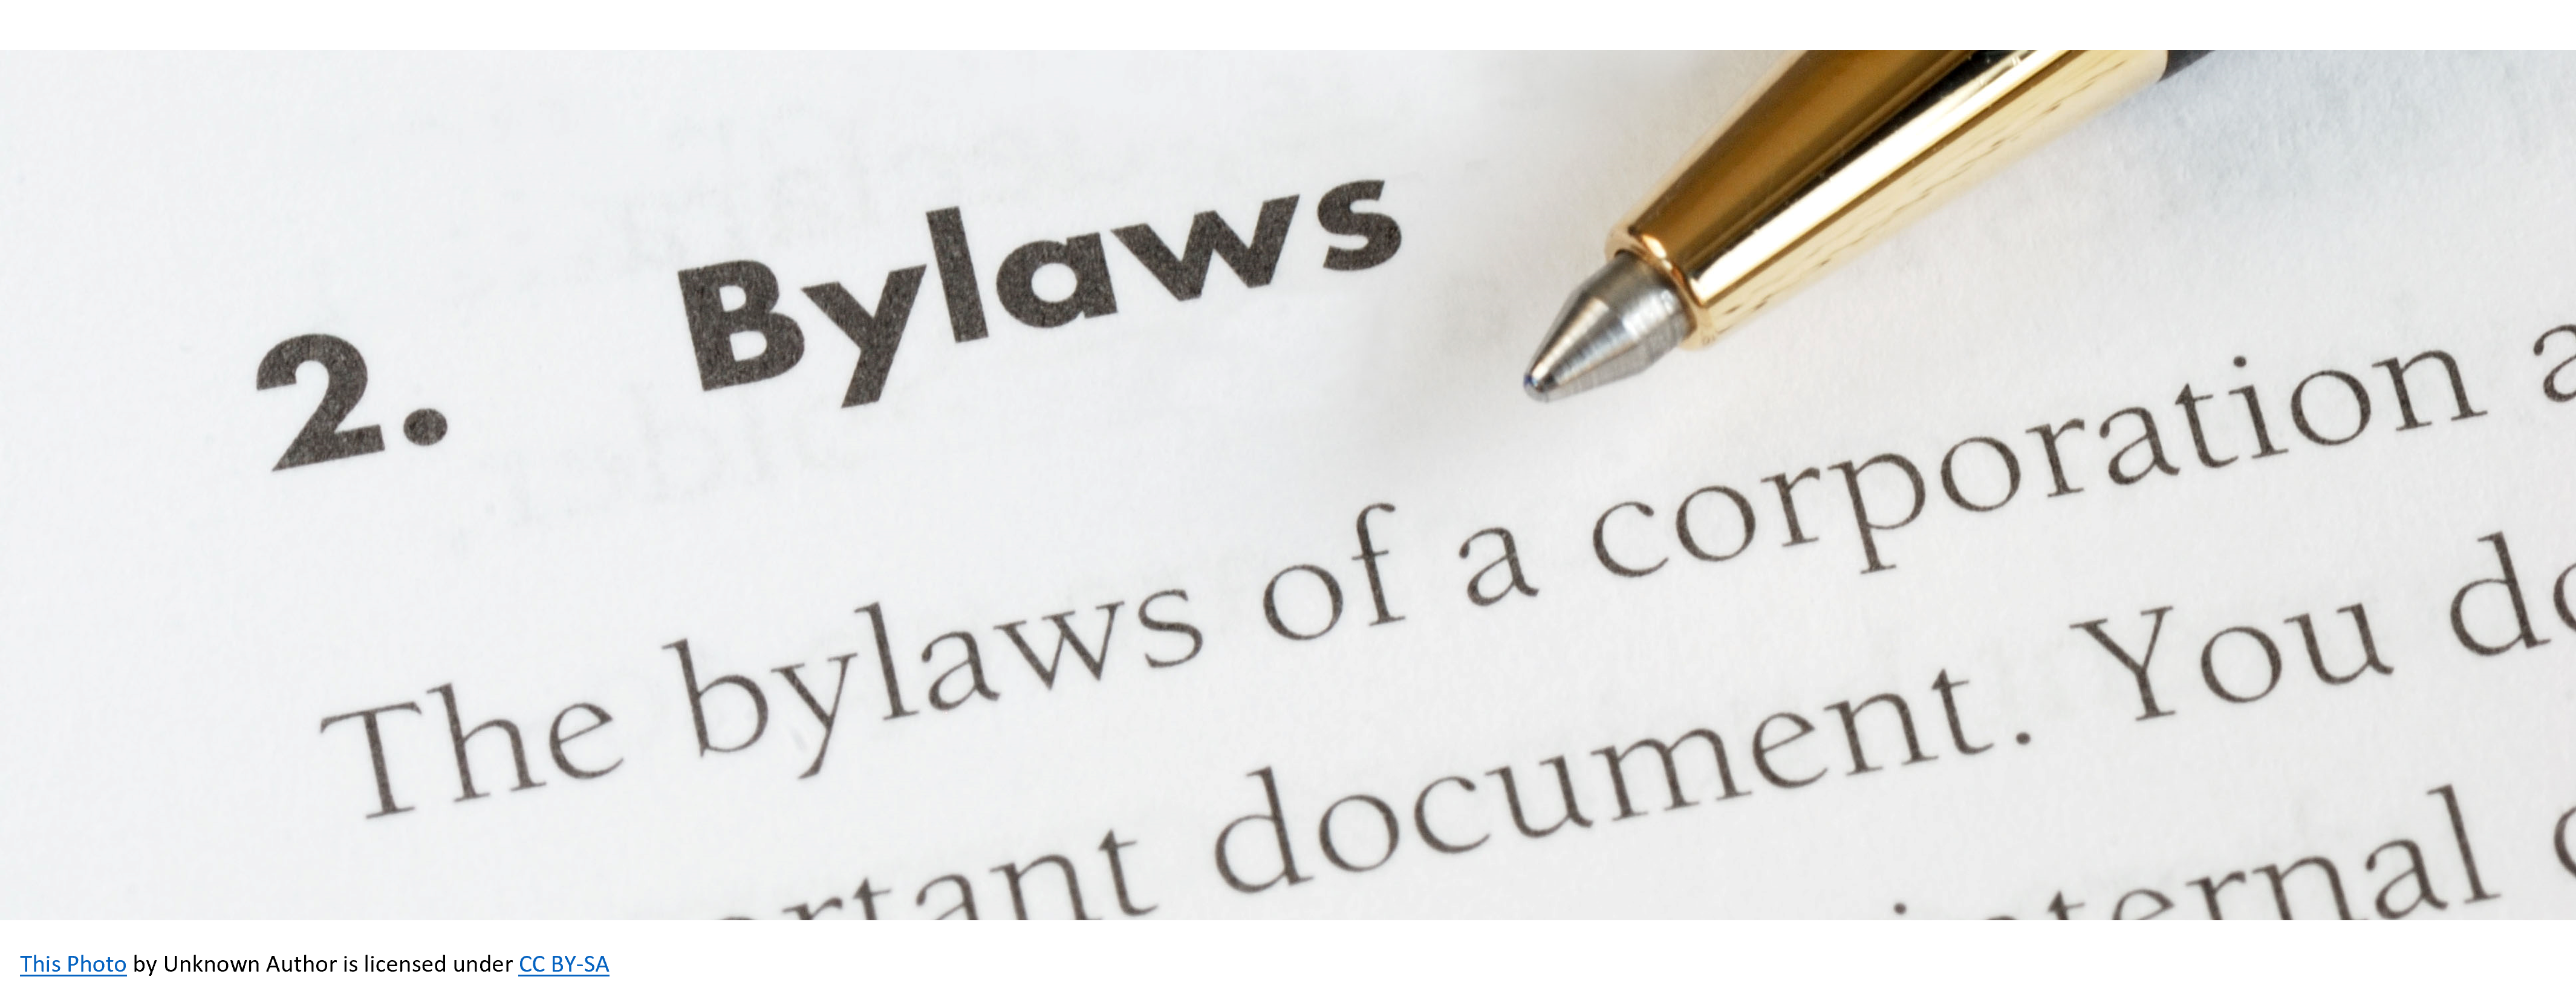 Bylaw - part of a document